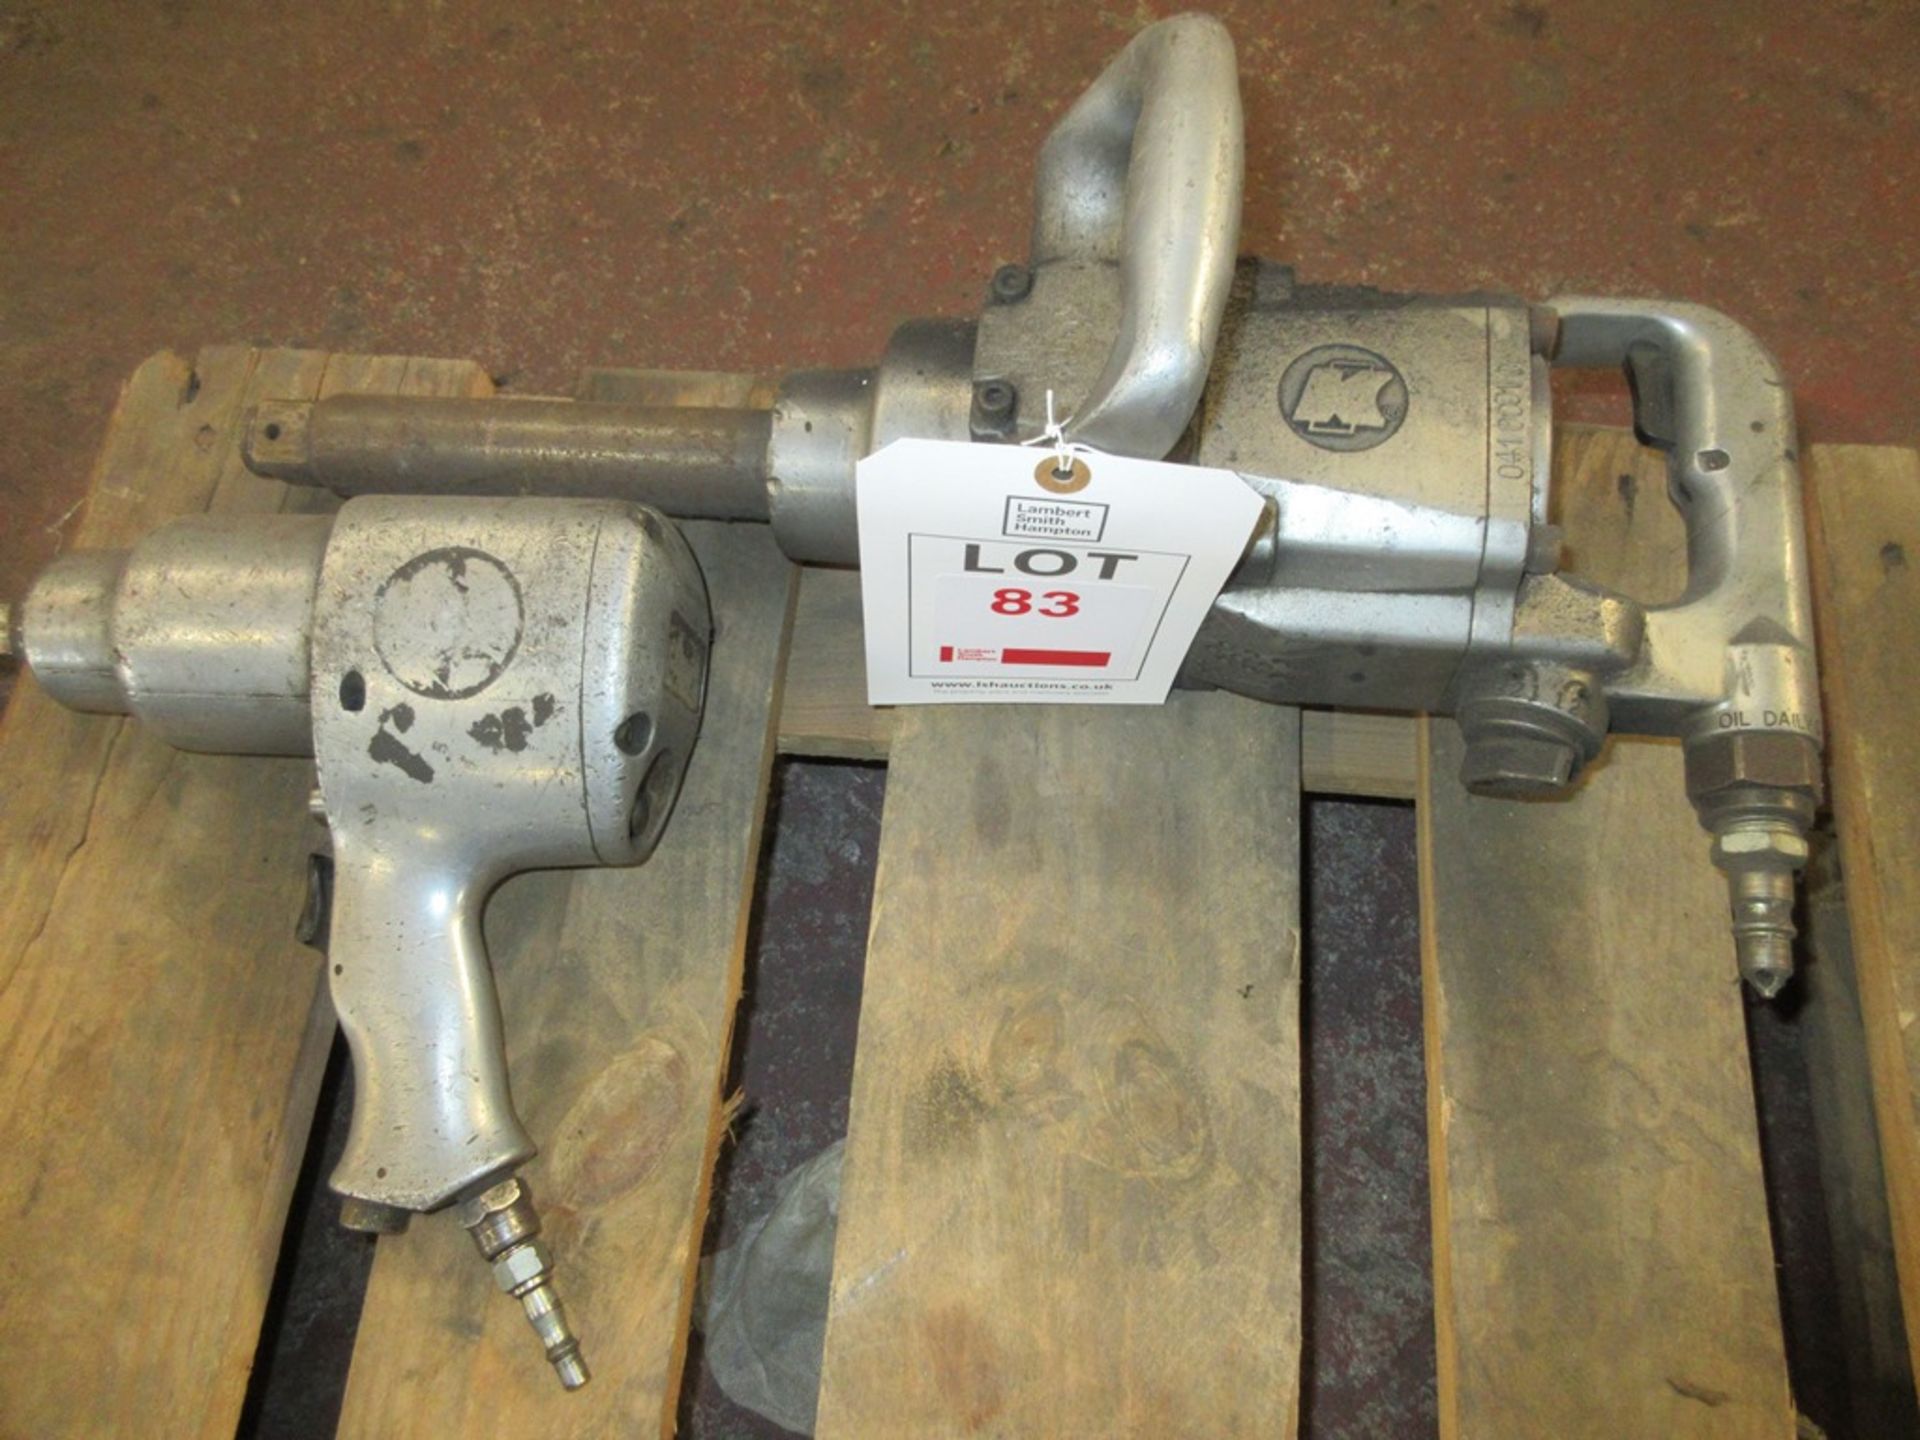 Two pneumatic impact wrenches